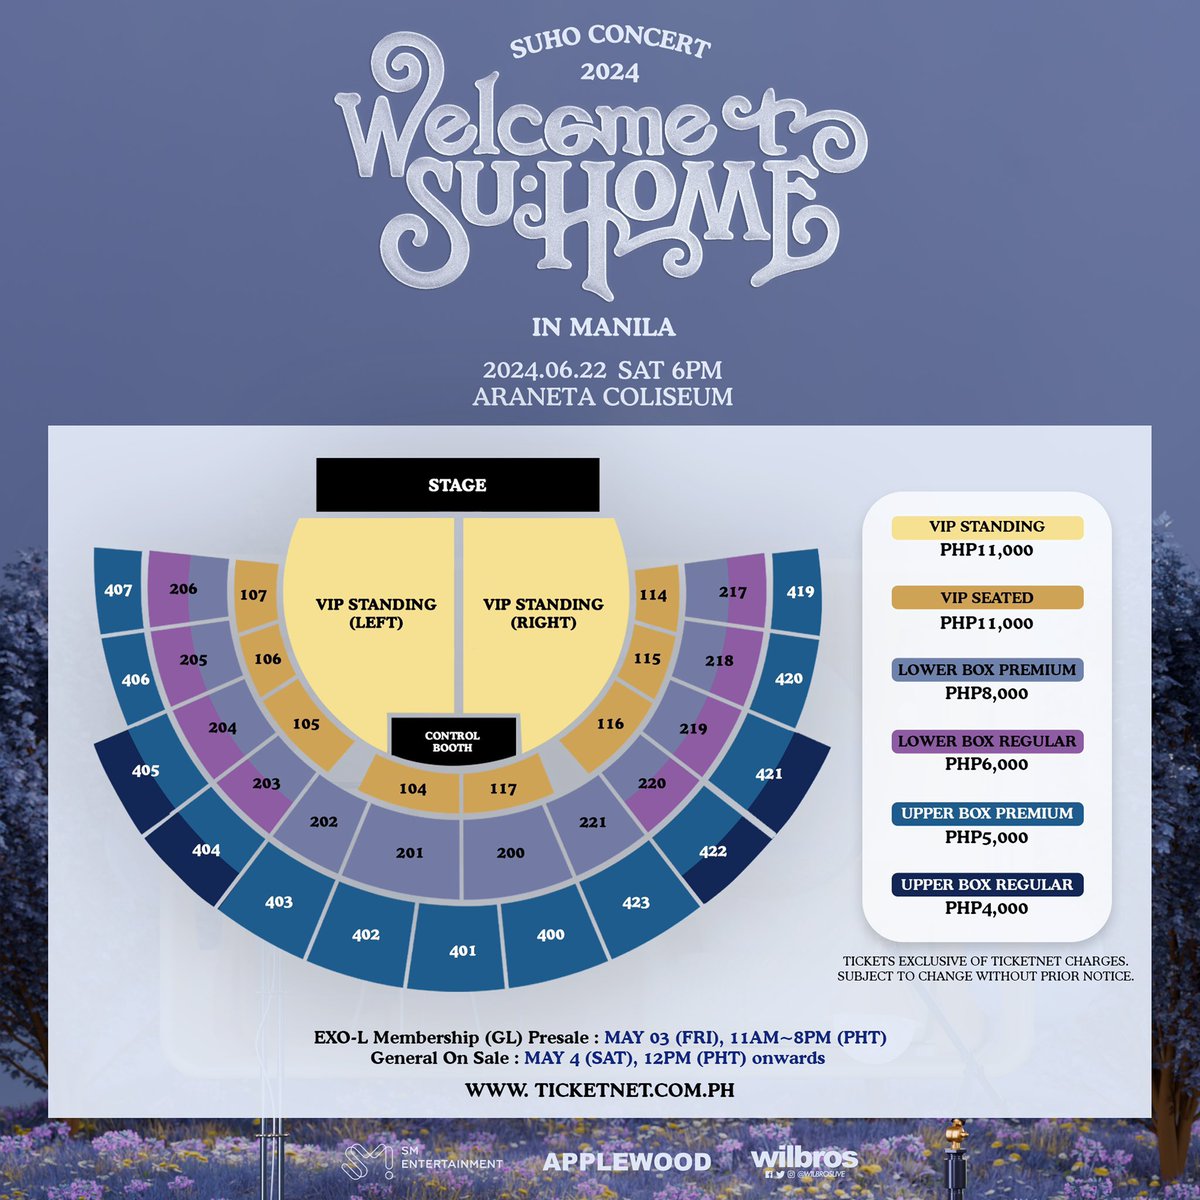 OPEN TICKETING ASSISTANCE 🎫

2024 SUHO CONCERT 
<SU:HOME> IN MANILA 🇵🇭

— Open for all seats 
— Open for presale & gensale
— Open for intl & local fans 
— Ticket under your name 

Message for bookings 💌
#SUHO #수호 #EXO #weareoneEXO
#SUHOME #2024SUHOASIATOUR
#SM #APPLEWOOD…